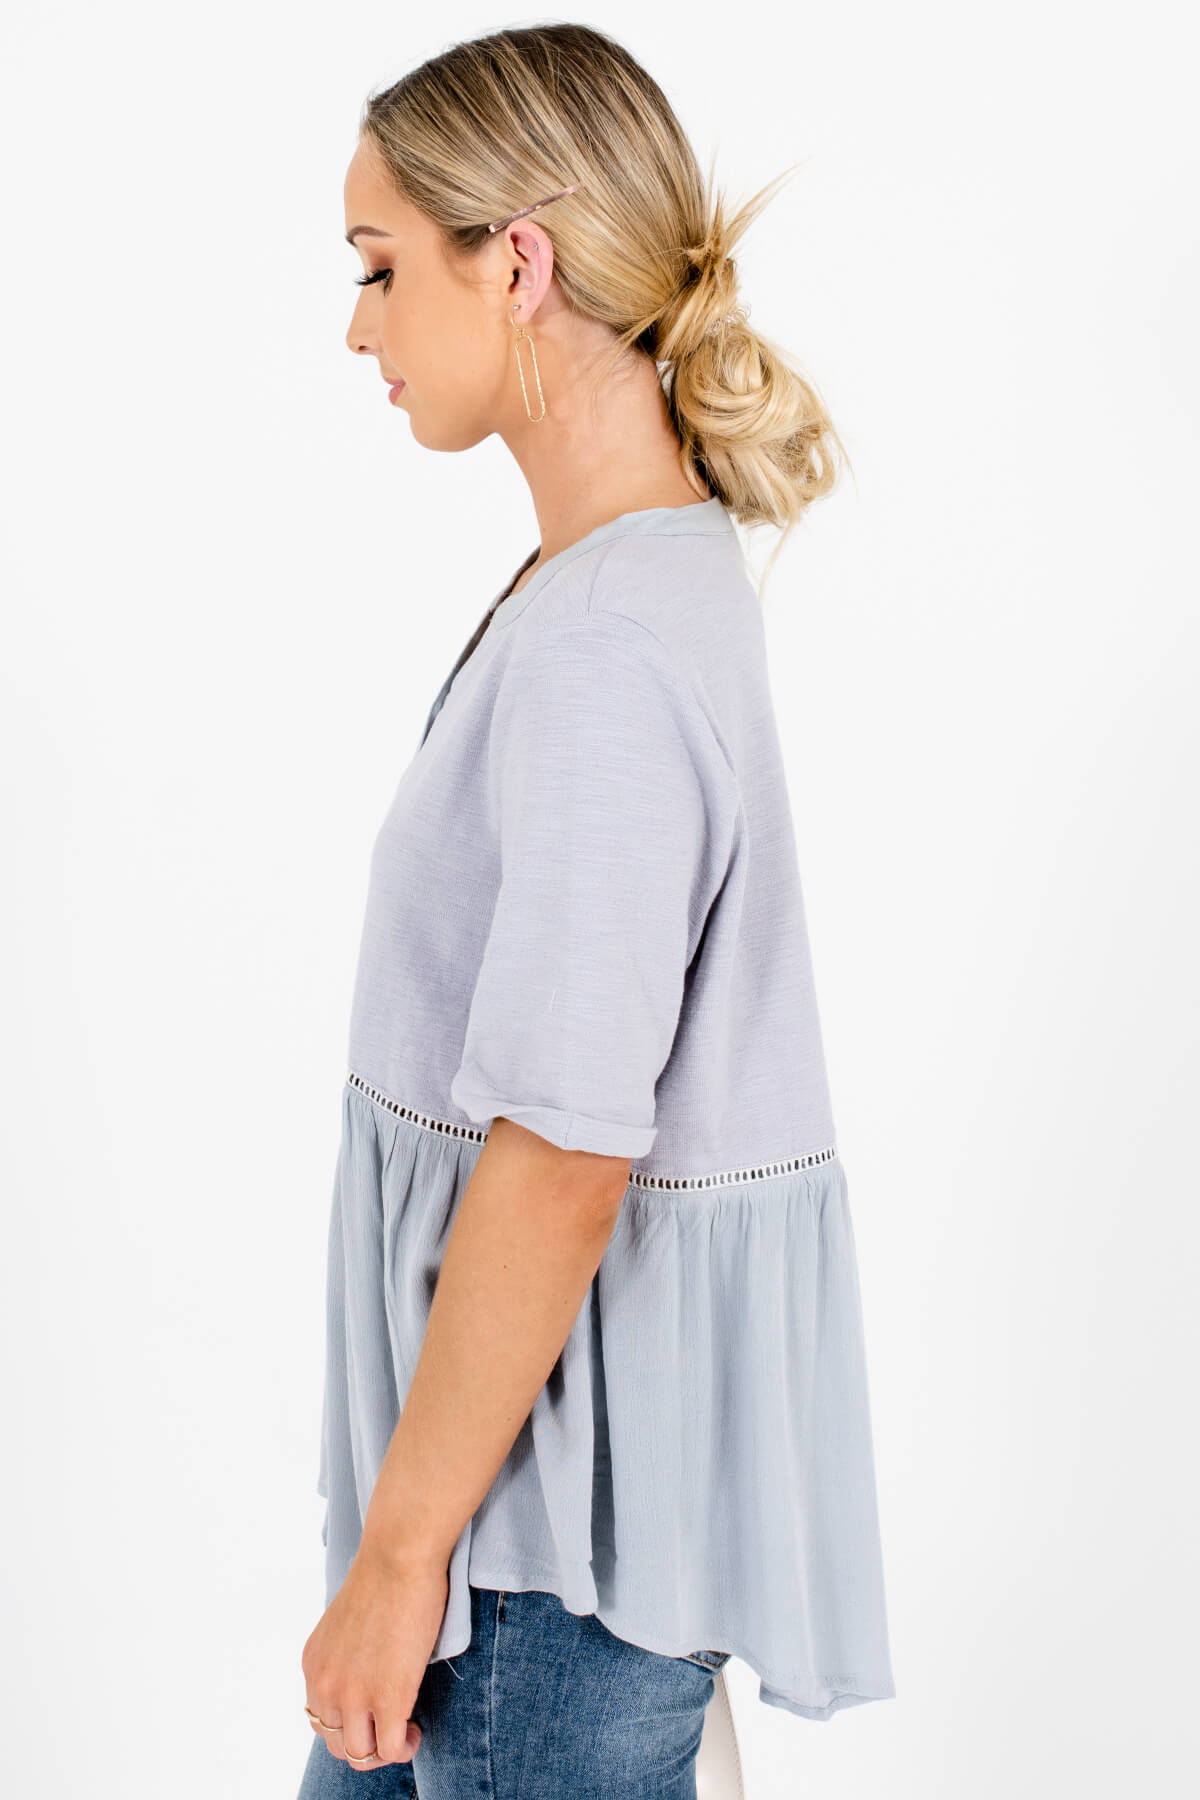 Blue-Gray Cute Button Up Boutique Tops for Women